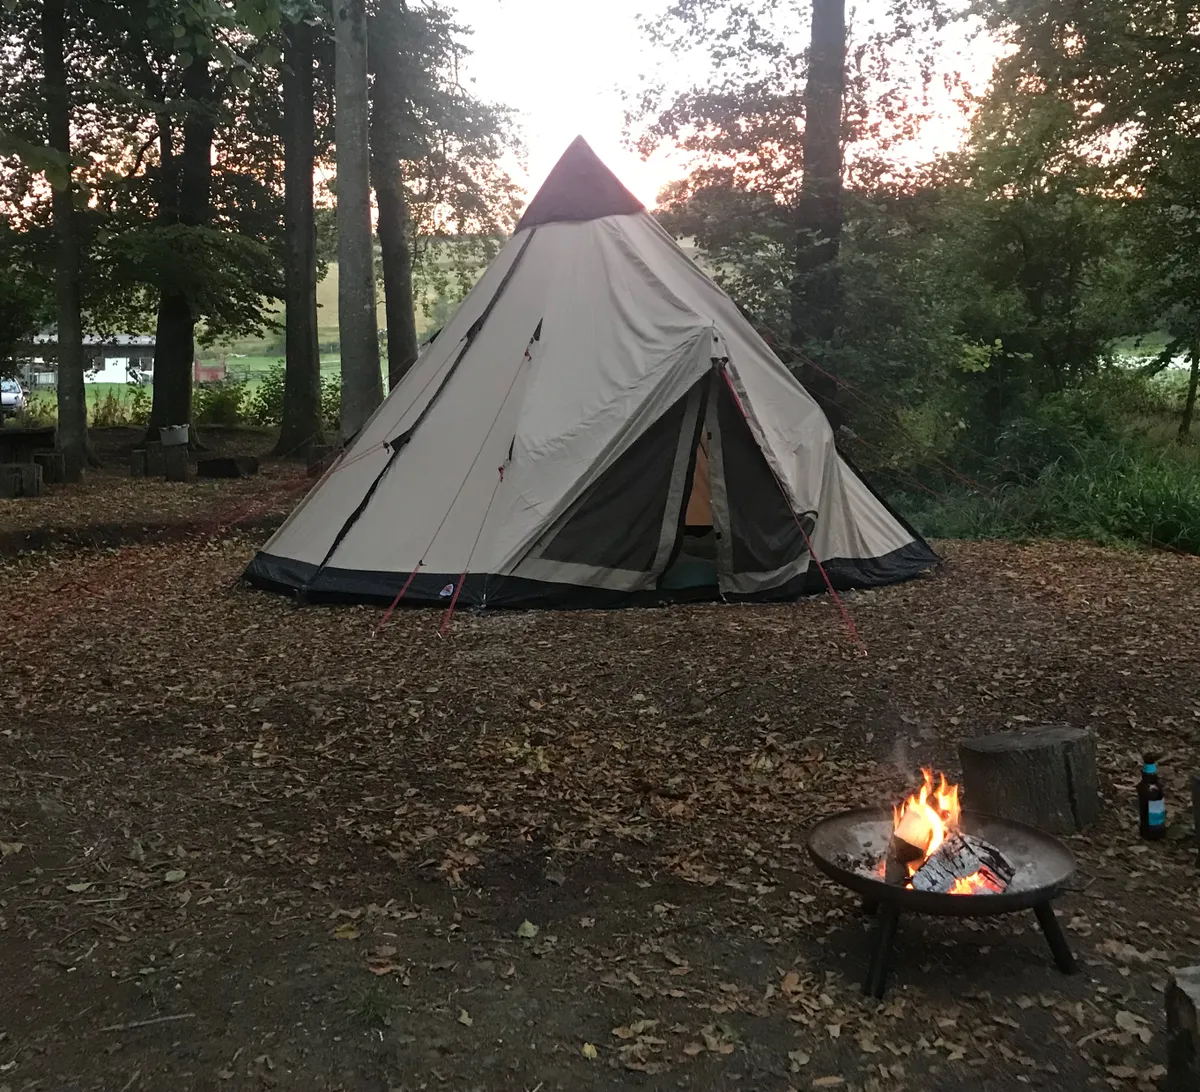 Tipi tent in woodland with a firepit